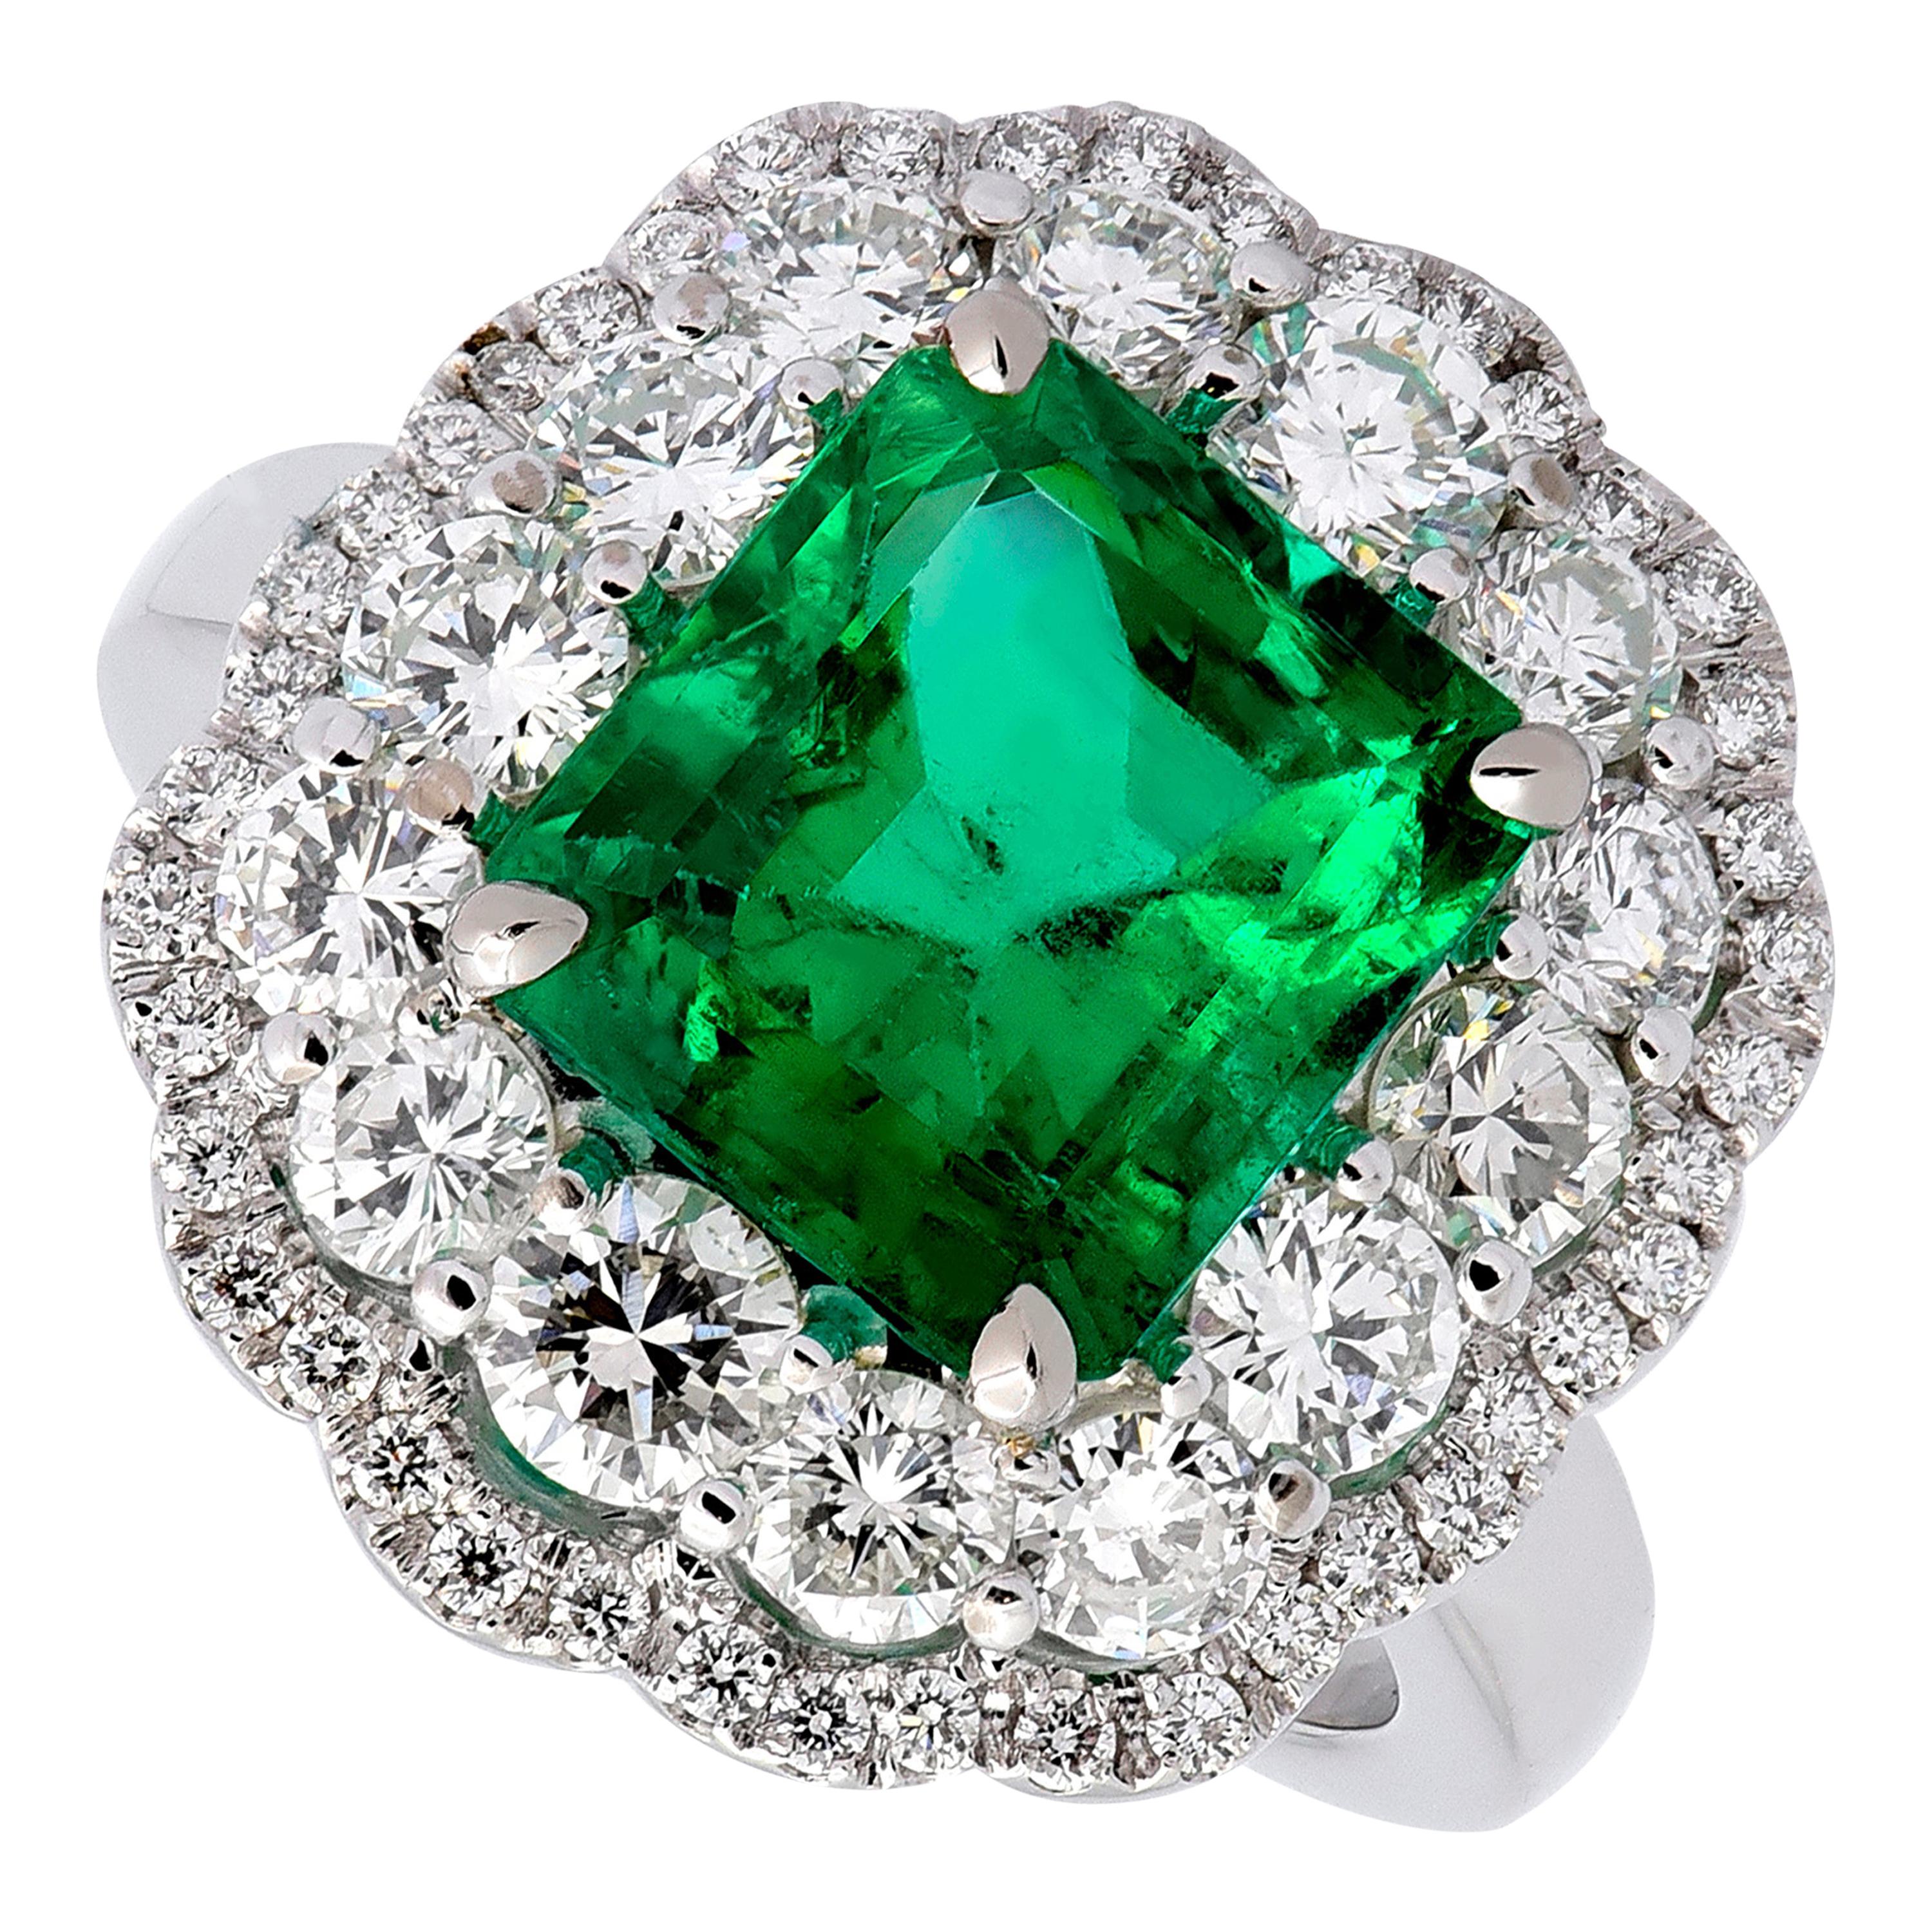 Incredible ring set with a emerald stone of 4.43 carat and diamonds.

One of a kind handcrafted solid 18 karat white gold ring with amazing Colombian Emerald.

Emerald is very difficult to photograph and actual Emerald is much nicer then on